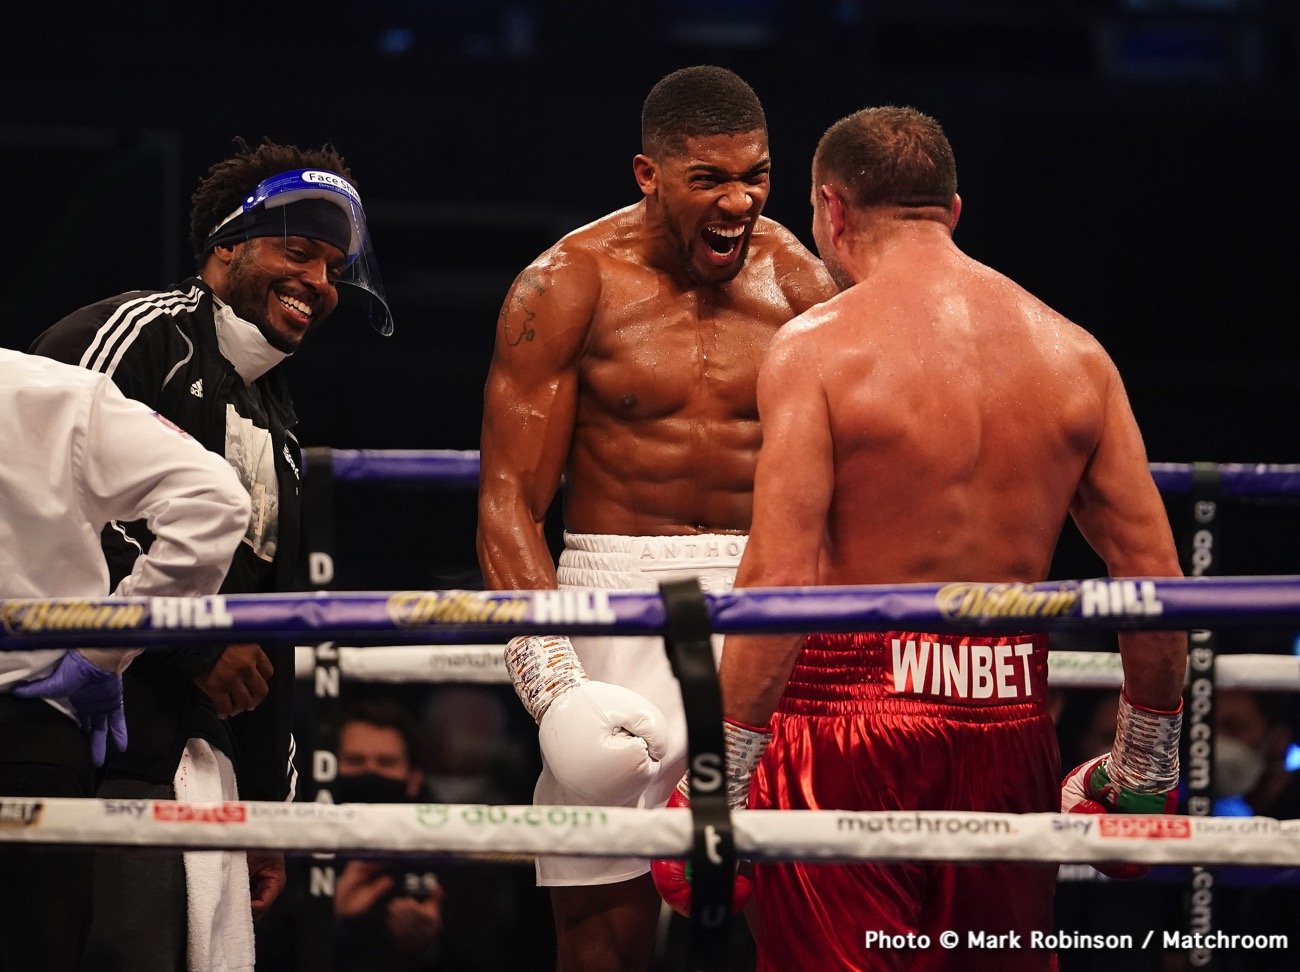 Image: Anthony Joshua vs. Deontay Wilder possible next year says Hearn